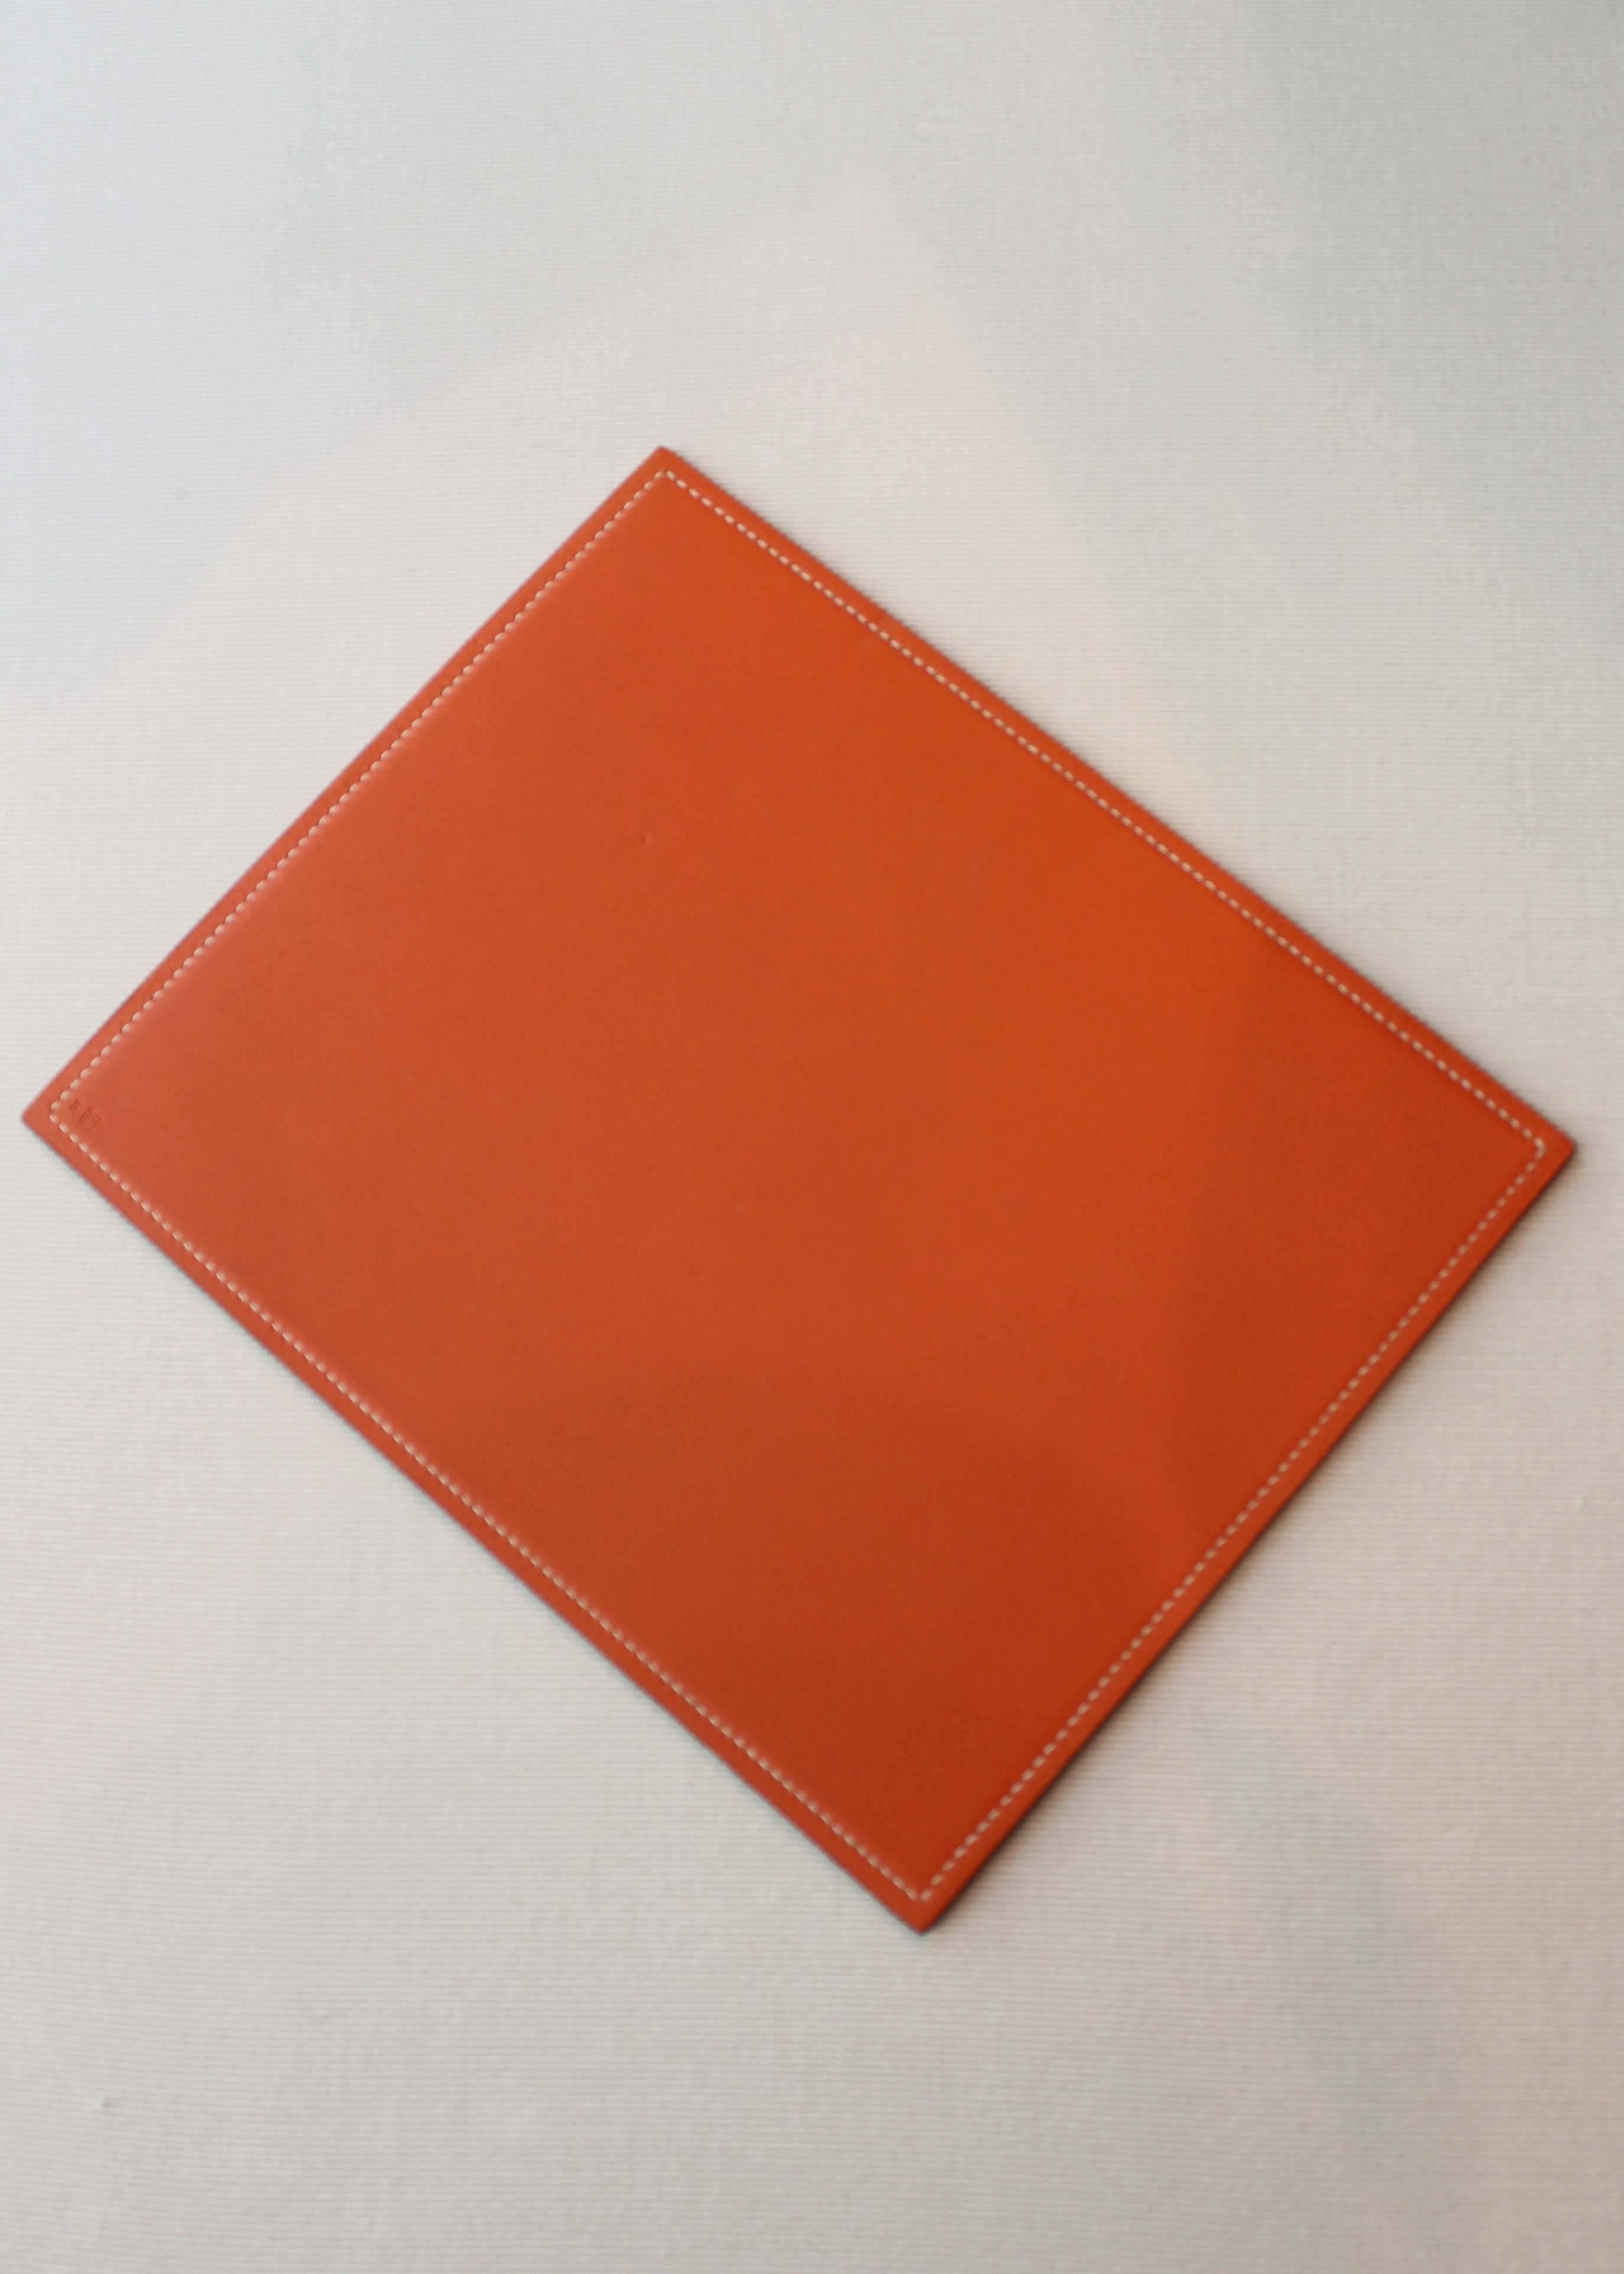 Vintage Hermès reversible leather mouse pad, brown and orange with white stitching. Minor wear/color variation at bottom center of brown side near stamp, see photos.